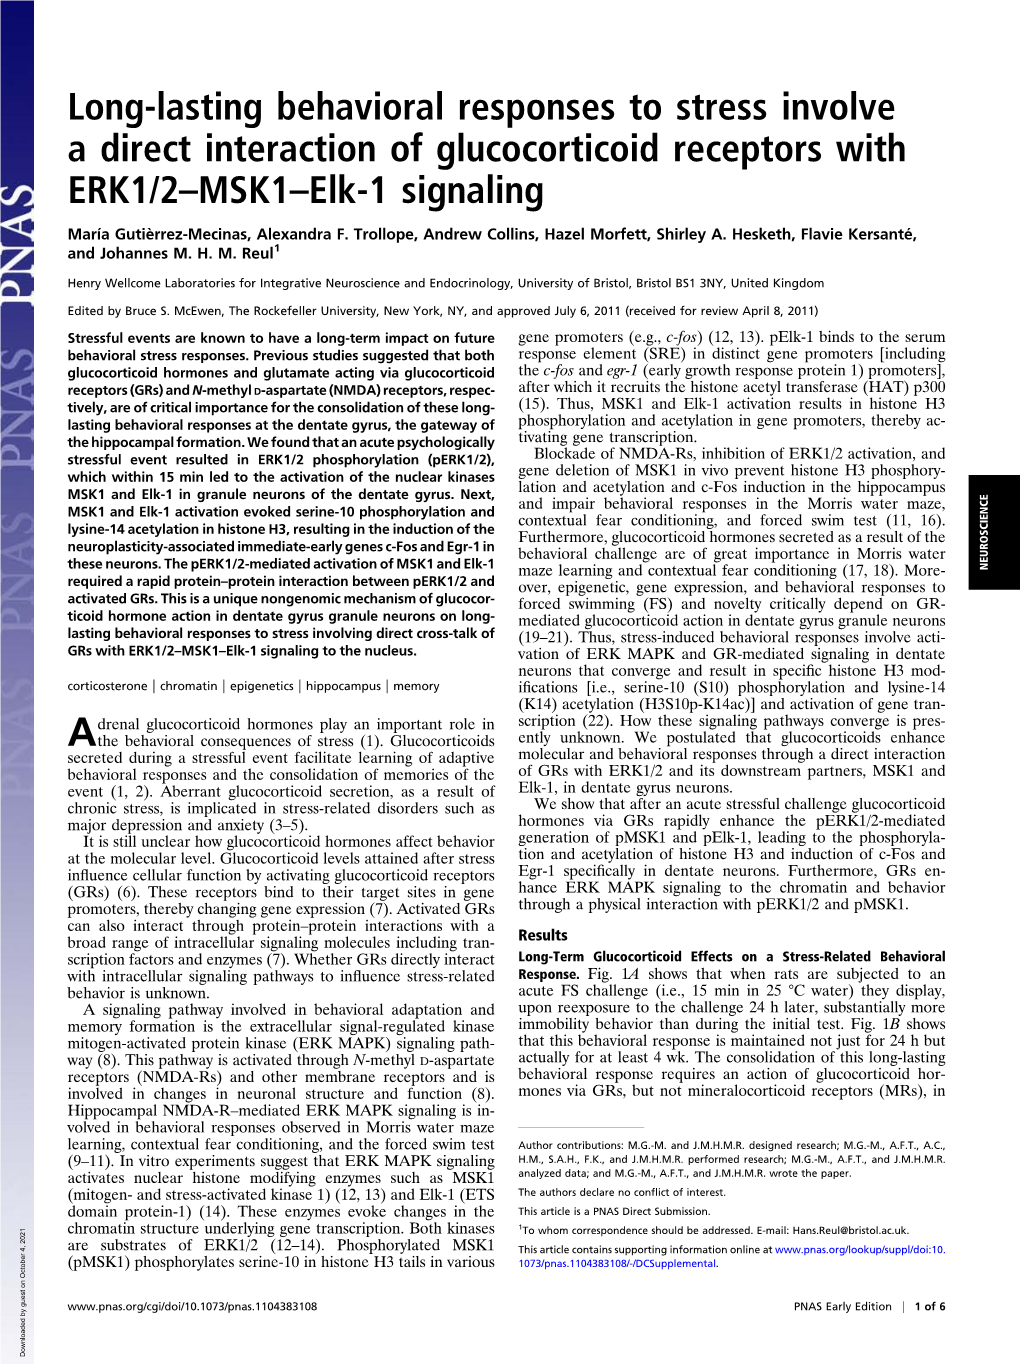 Long-Lasting Behavioral Responses to Stress Involve a Direct Interaction of Glucocorticoid Receptors with ERK1/2–MSK1–Elk-1 Signaling